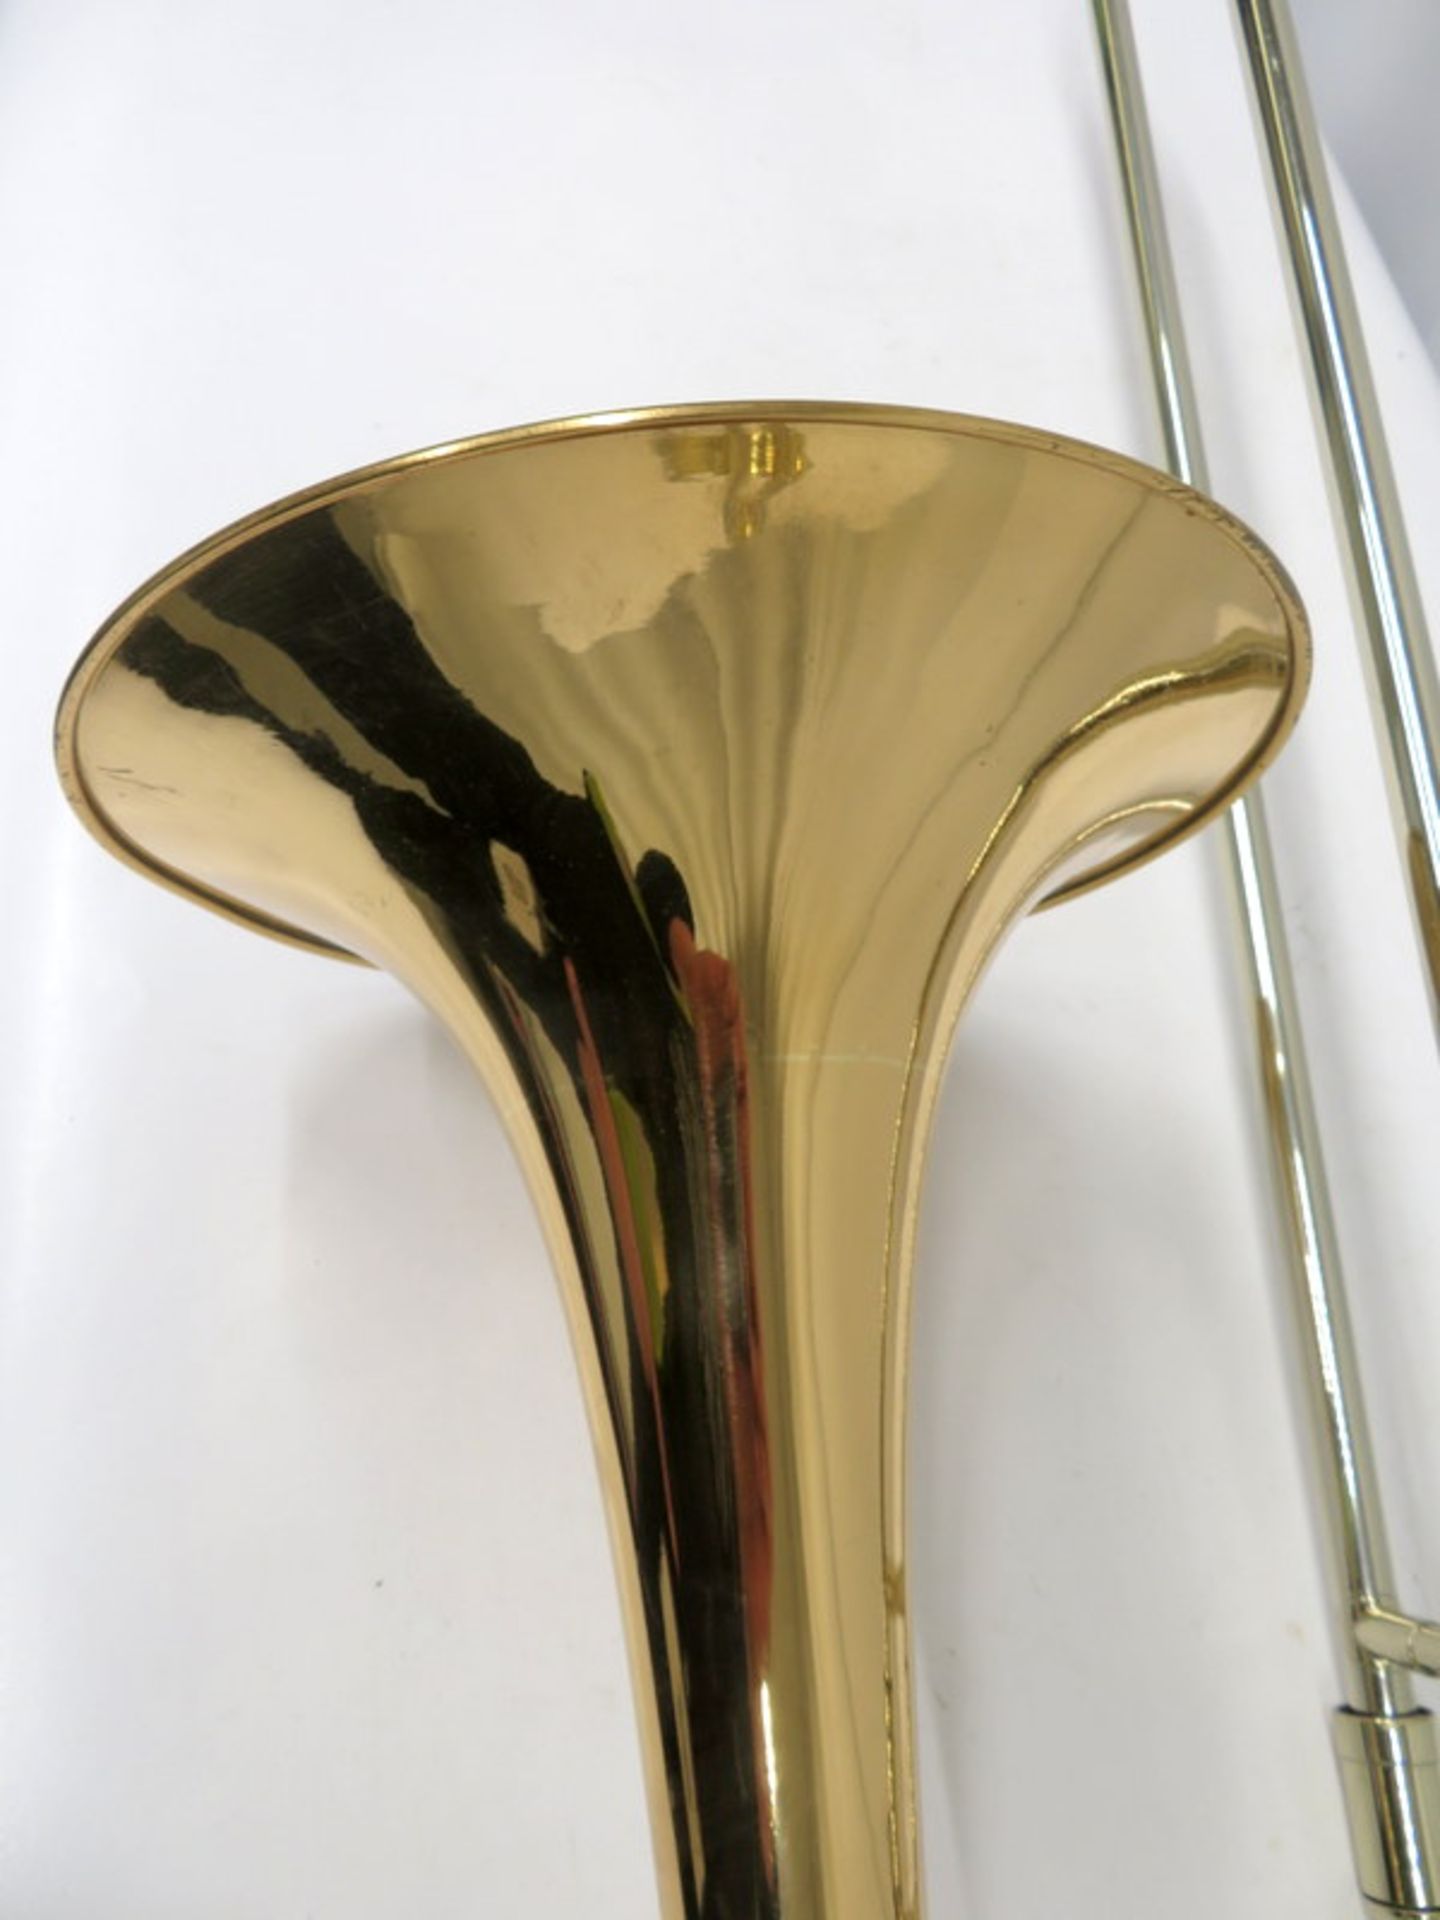 Besson Sovereign Trombone With Case. Serial Number: 826266. Please Note That This Item Ha - Image 14 of 19